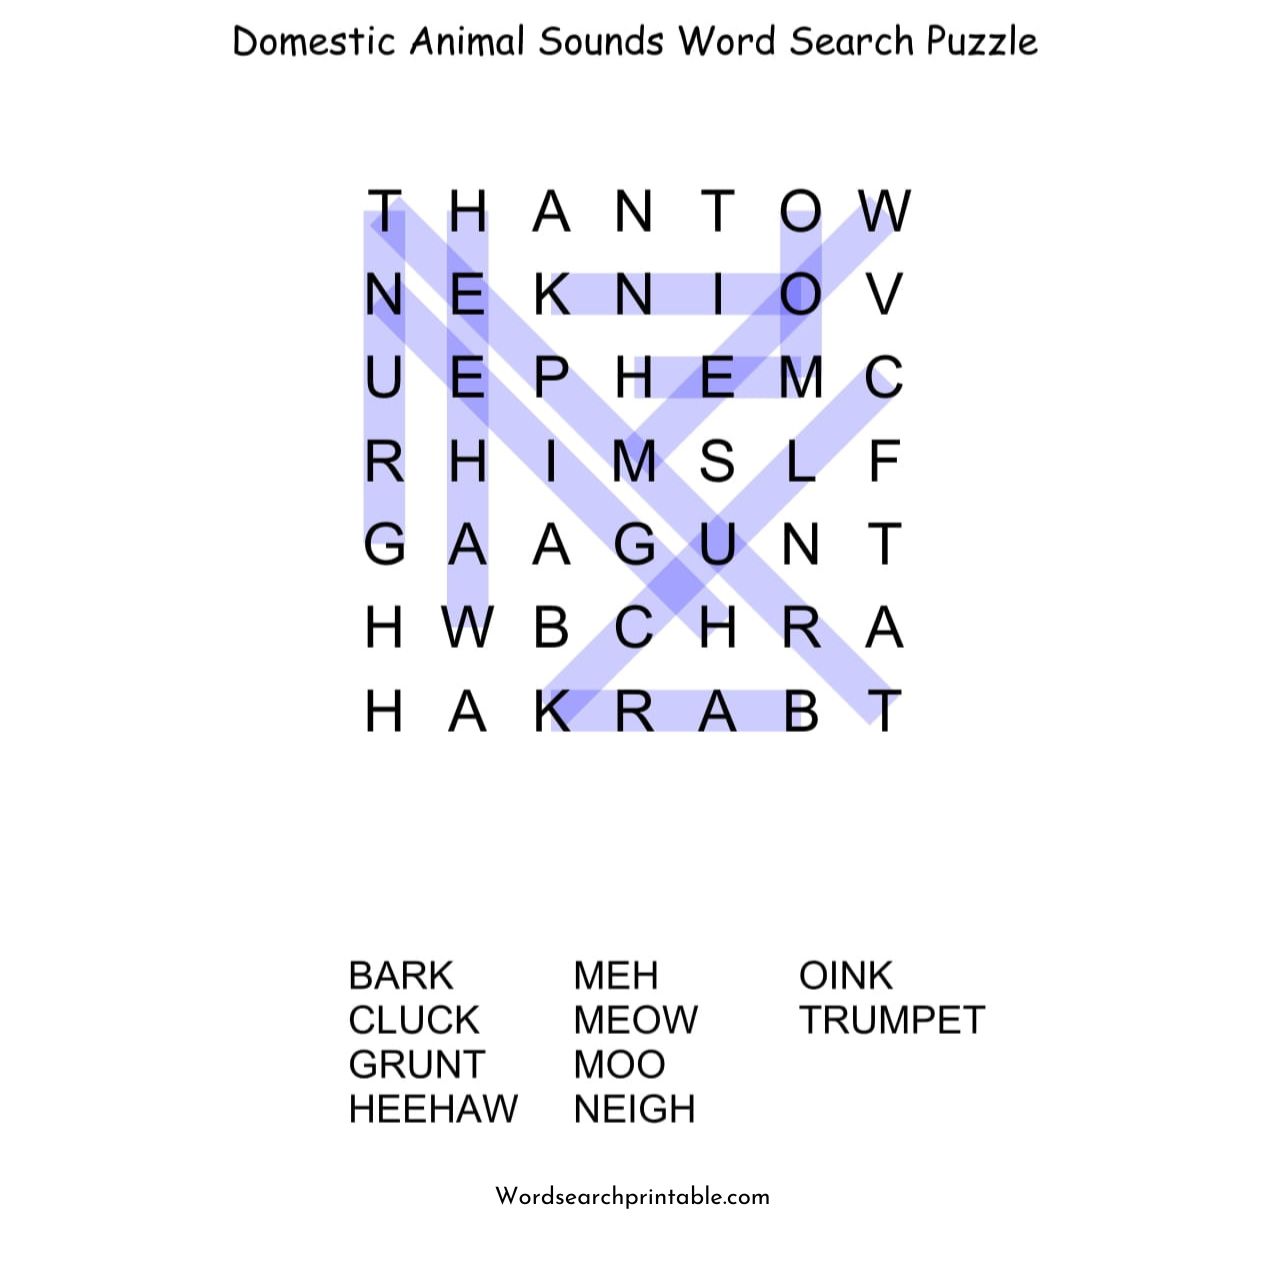 domestic animal sounds word search puzzle solution